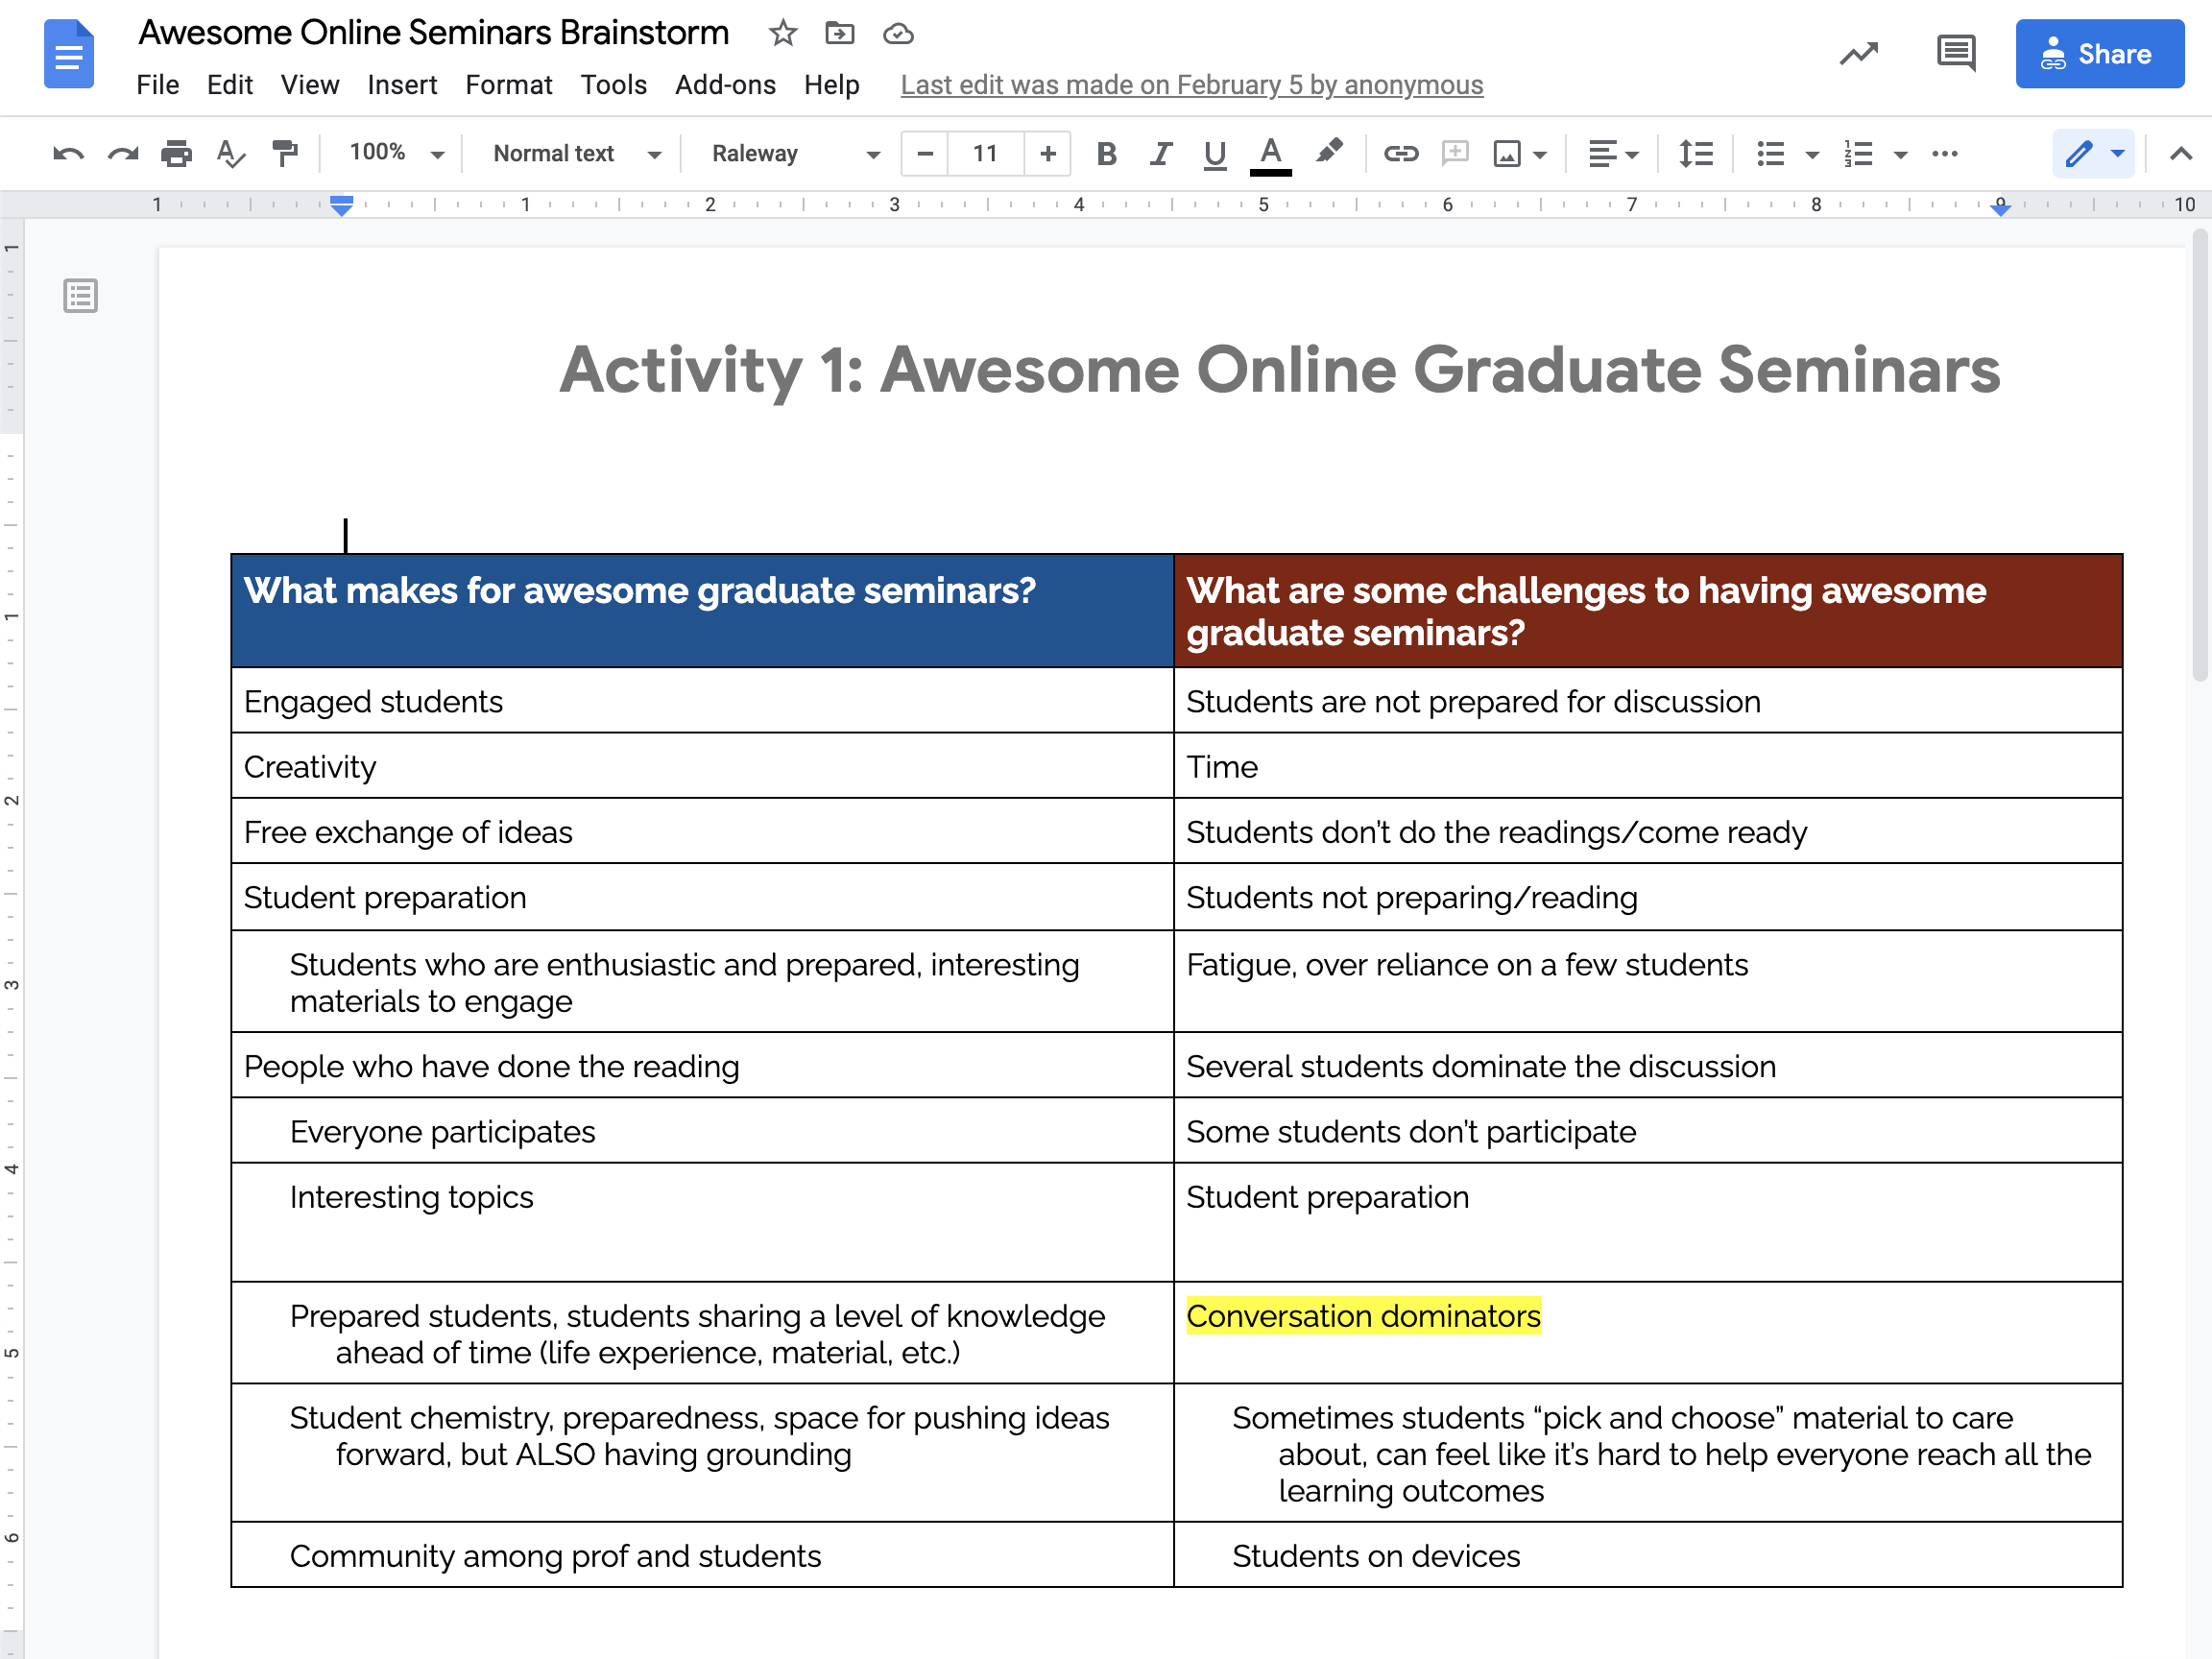 Screenshot of collaborative Google Doc containing a table for brainstorming